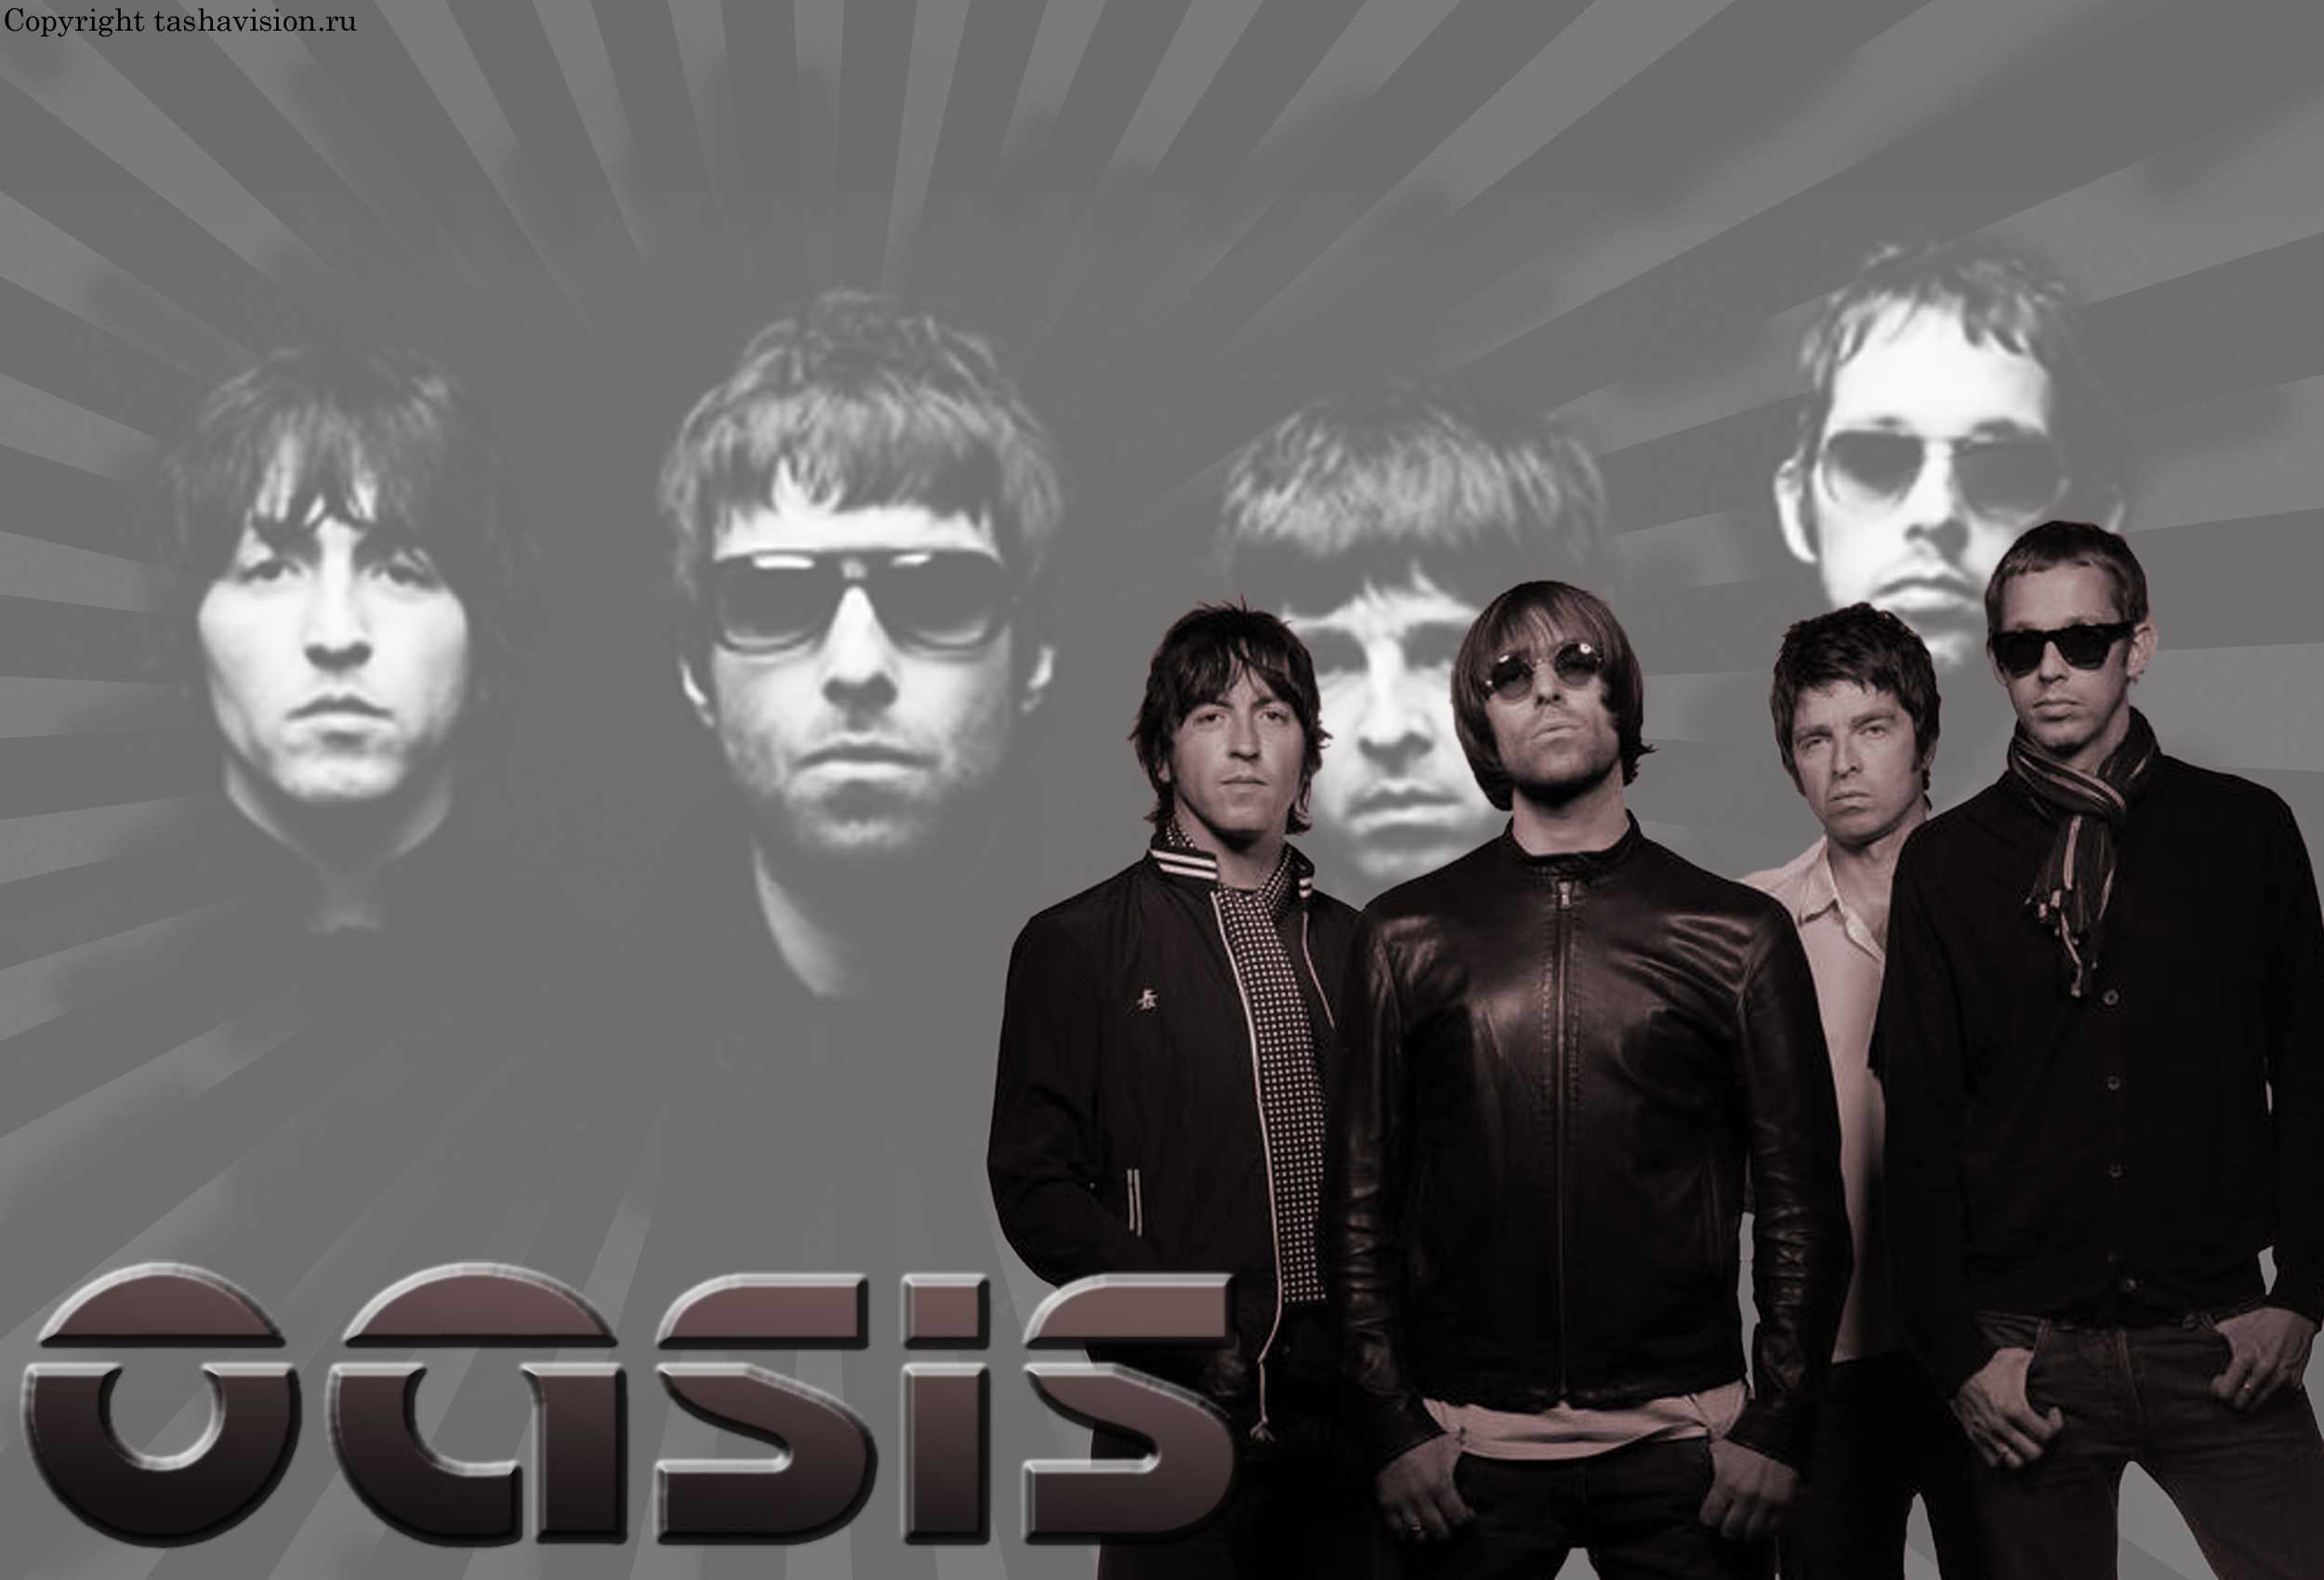 Дискография oasis - oasis discography - abcdef.wiki